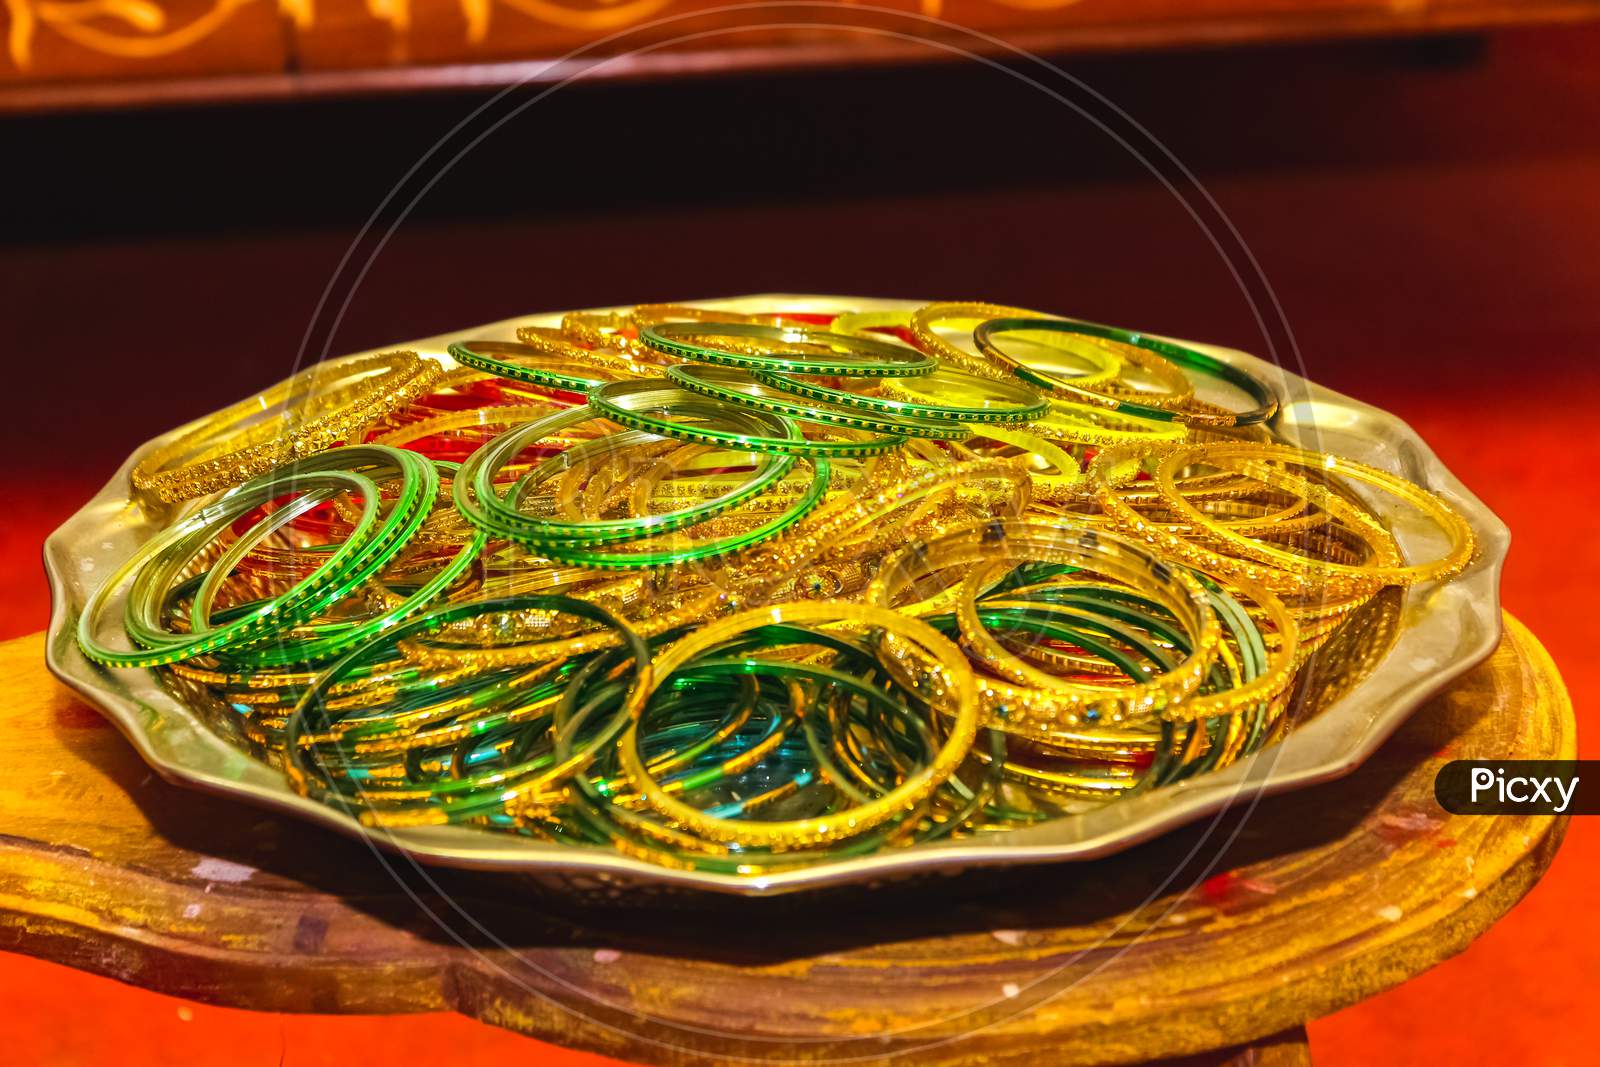 Colorful Indian Bangles. Stacks Of Beautiful Colorful Indian Bangles For Bride On Sliver Plate. Glass Bangles On Steel Plate.